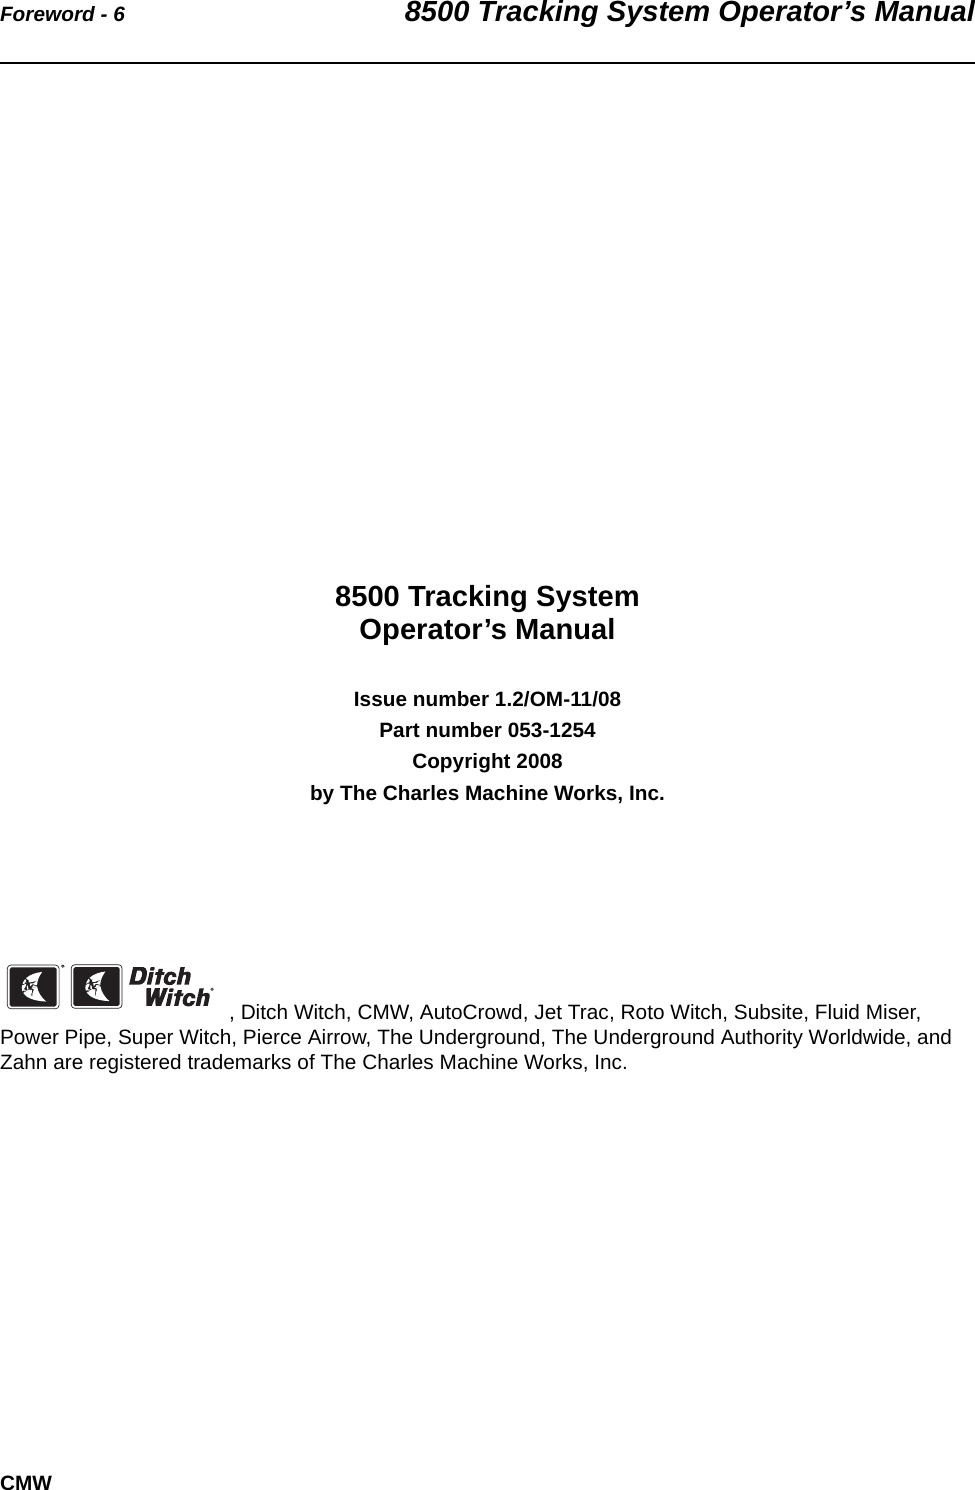 Foreword - 6 8500 Tracking System Operator’s ManualCMW8500 Tracking SystemOperator’s ManualIssue number 1.2/OM-11/08Part number 053-1254 Copyright 2008by The Charles Machine Works, Inc., Ditch Witch, CMW, AutoCrowd, Jet Trac, Roto Witch, Subsite, Fluid Miser, Power Pipe, Super Witch, Pierce Airrow, The Underground, The Underground Authority Worldwide, and Zahn are registered trademarks of The Charles Machine Works, Inc.